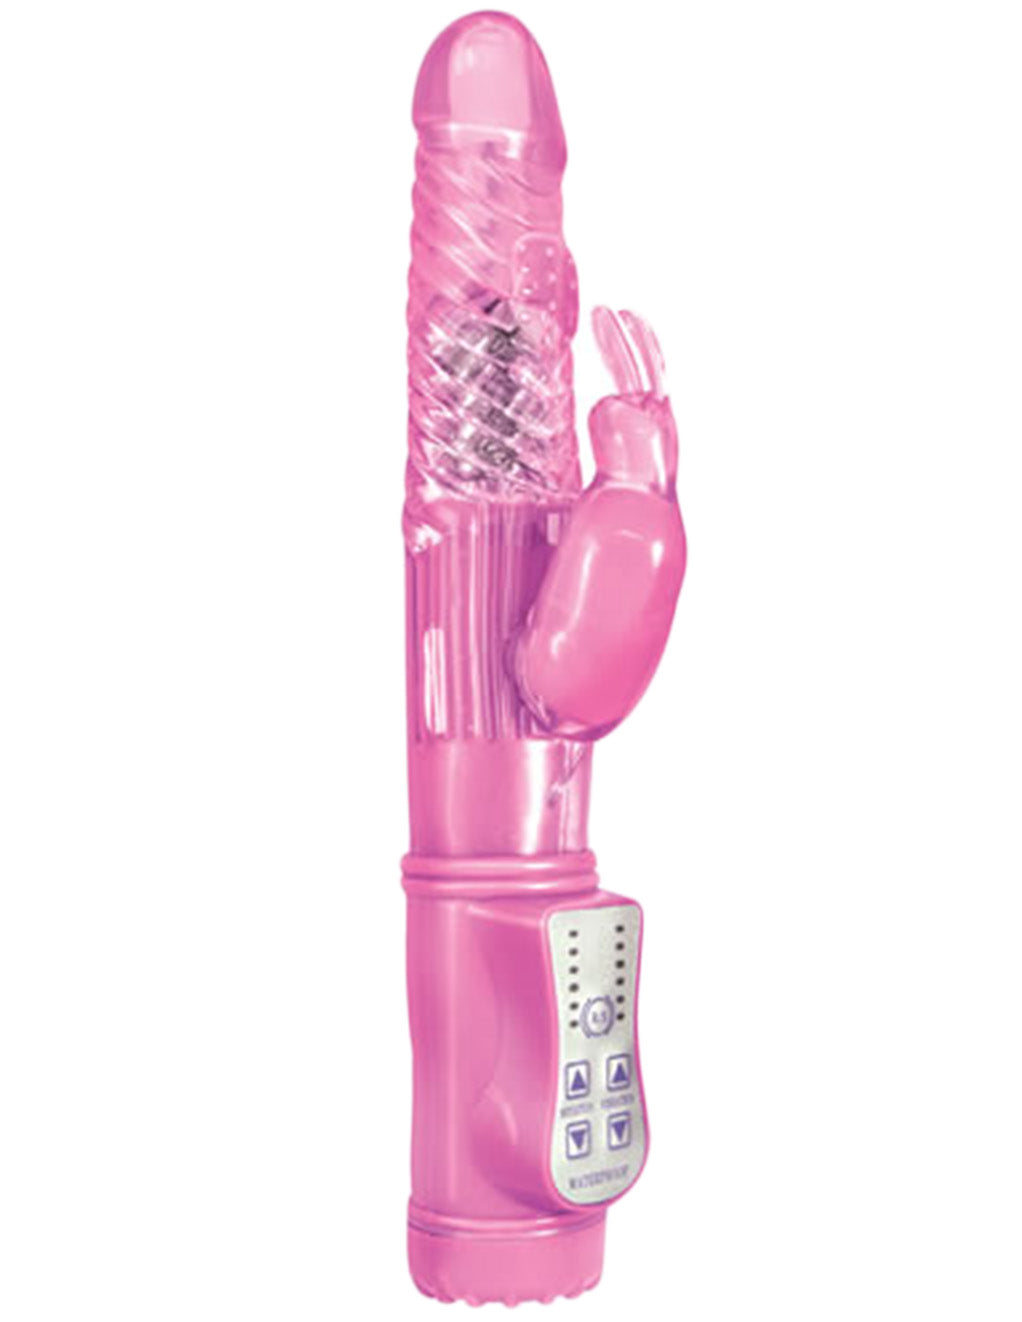 Energize Her Bunny 2 Rechargeable Rabbit Vibrator- Pink- Front